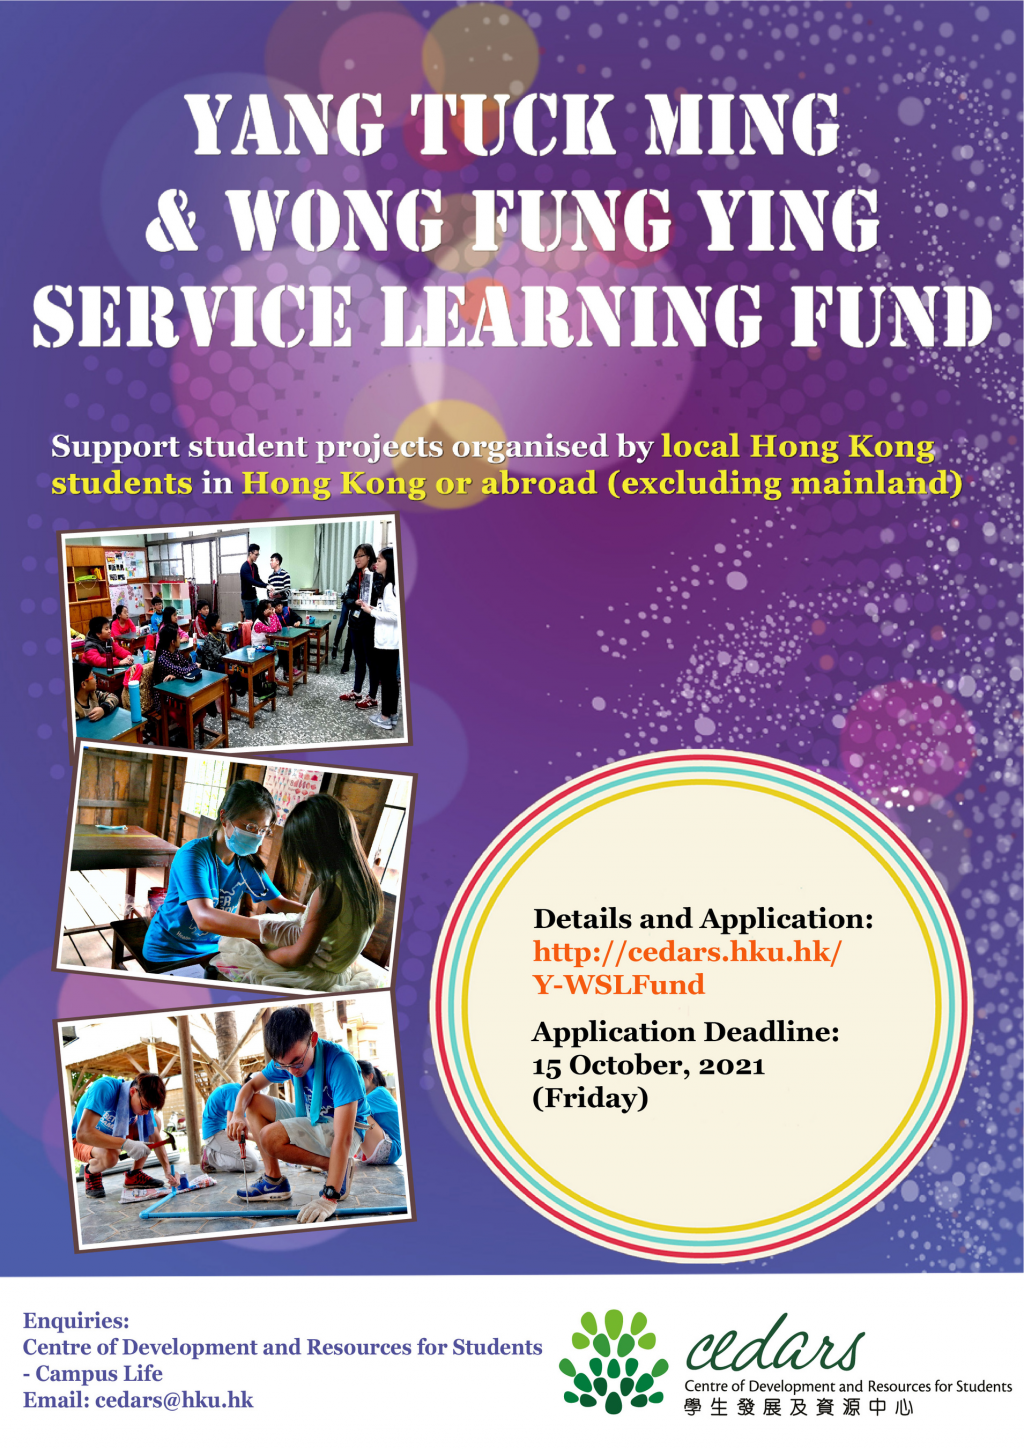 Apply Now: Yang Tuck Ming & Wong Fung Ying Service Learning Fund